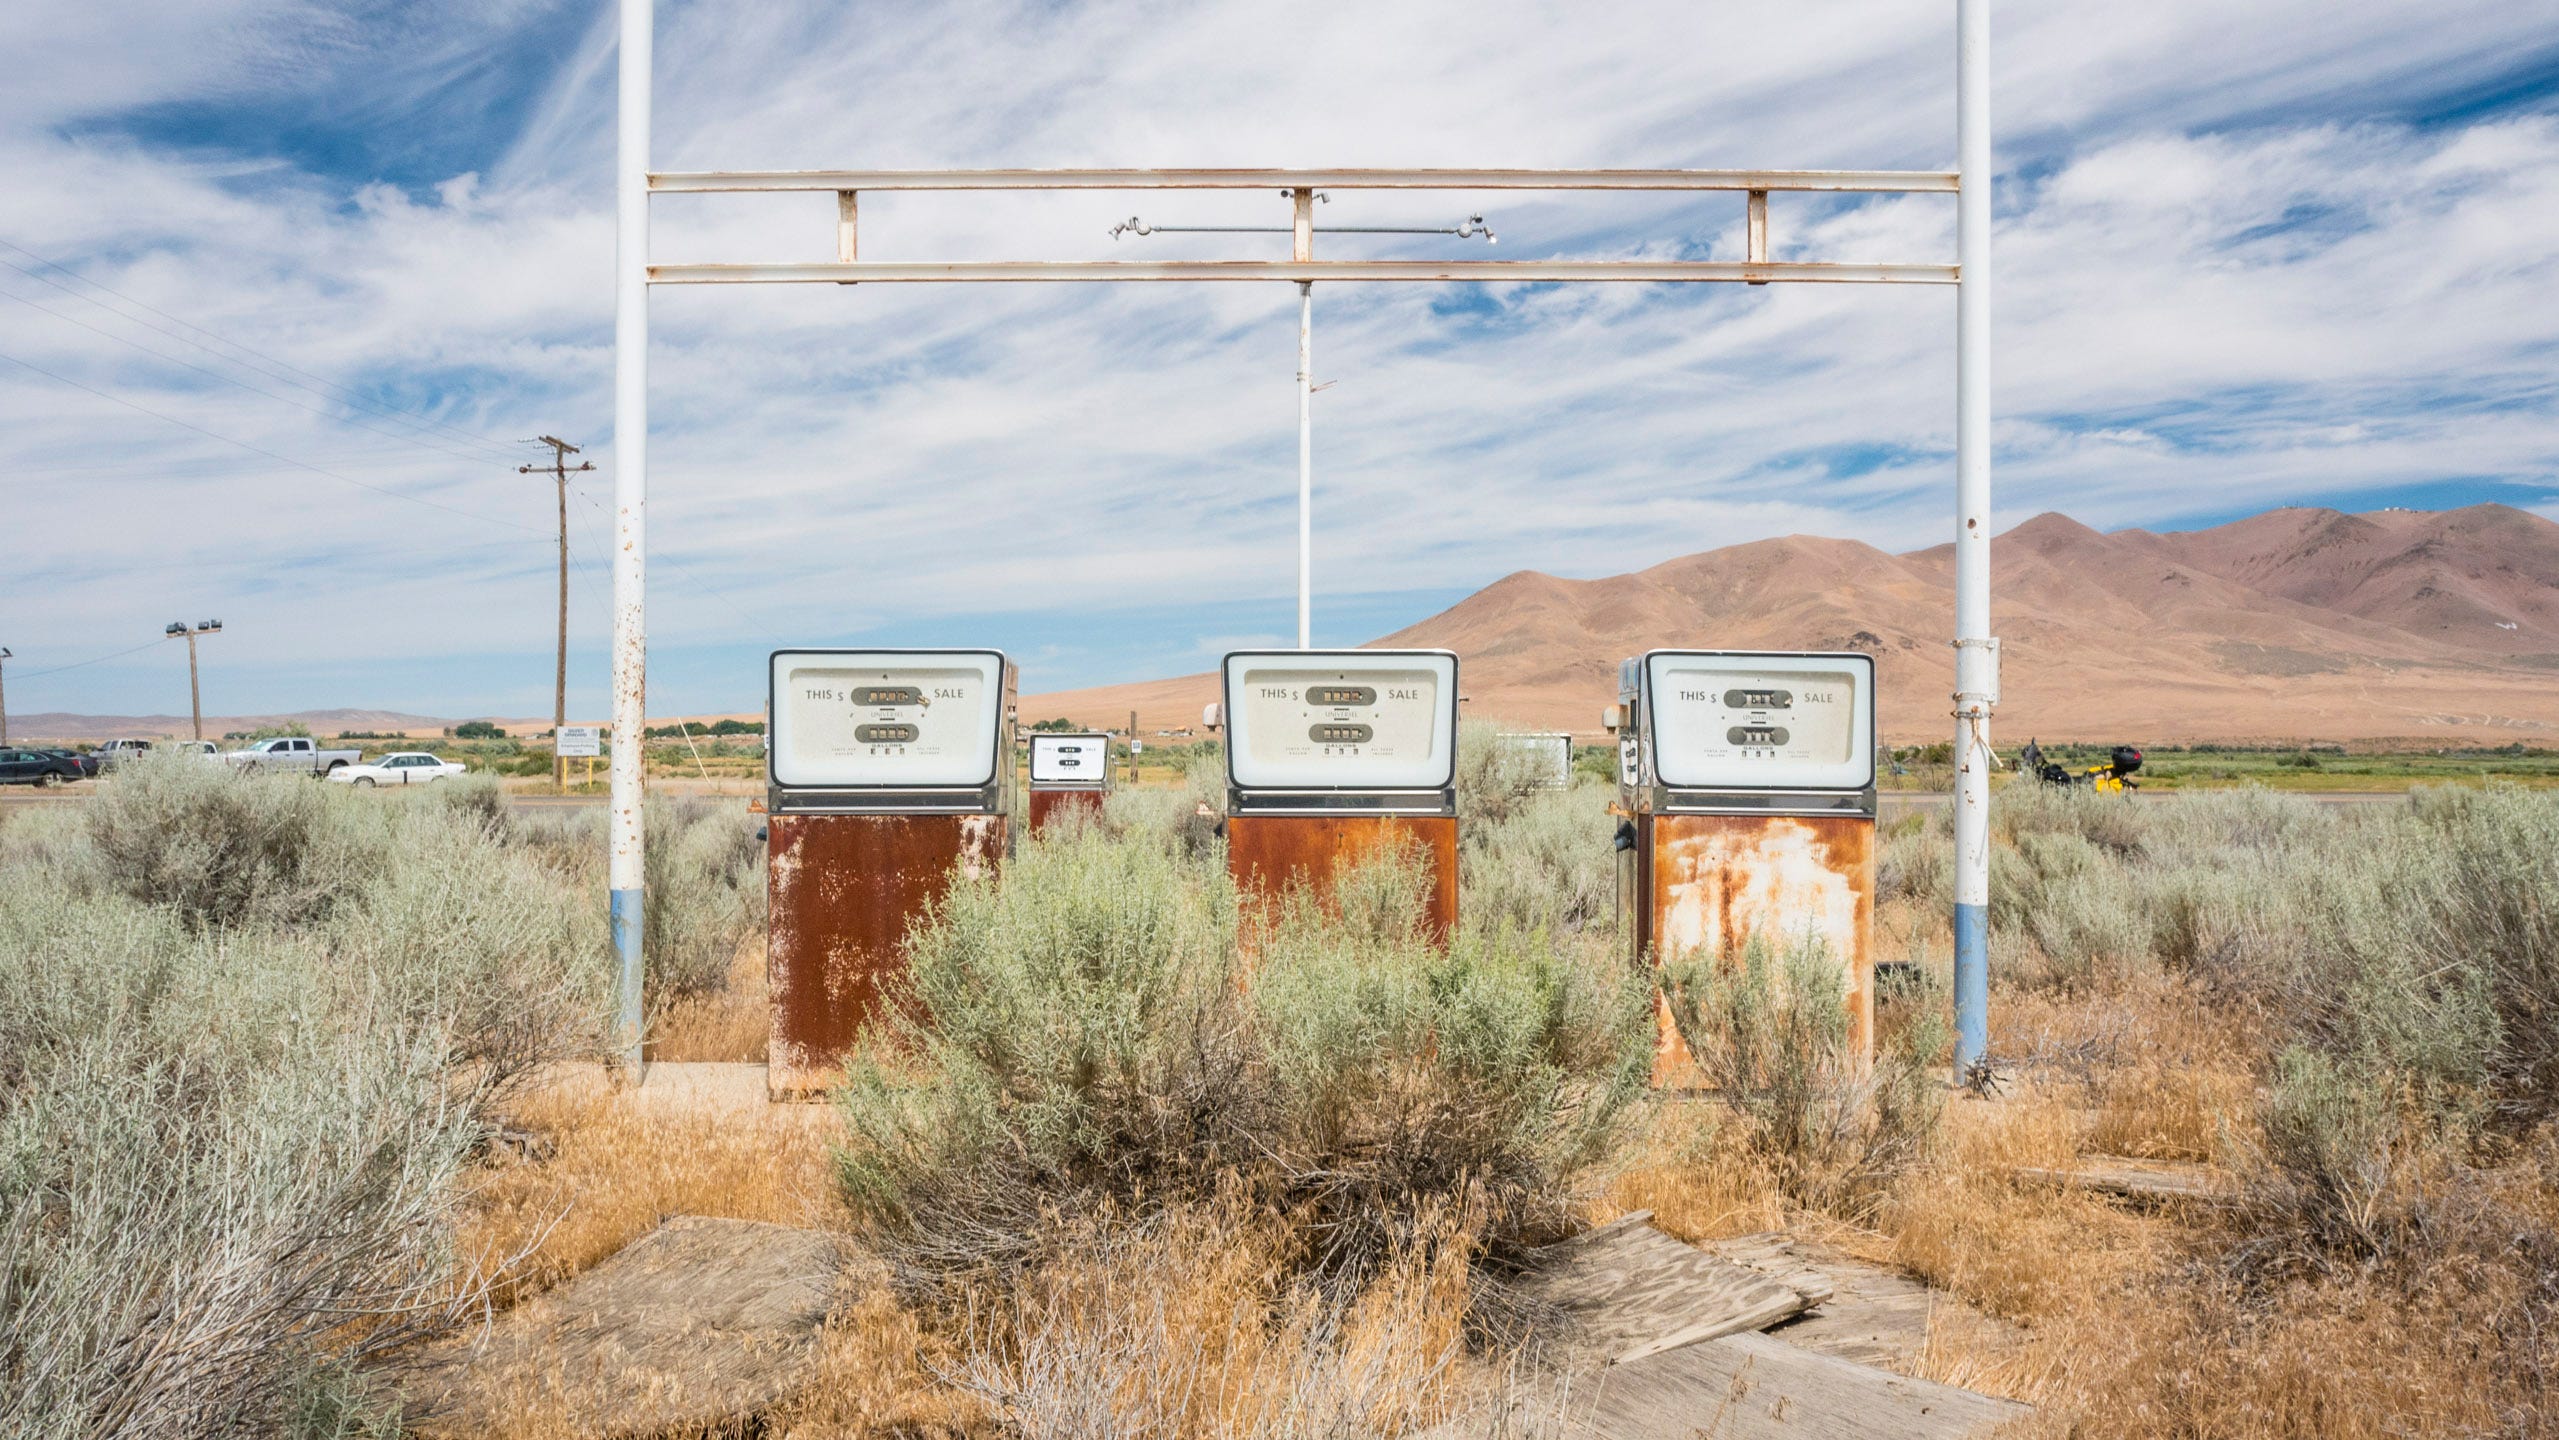 Color photograph of an old, long-abandoned mid-20th century gas station. In the center of the photo are three rectangular gasoline pumps, their lower portions rusty from prolonged exposure to the weather. An overhead gantry that may have held an awning is above the pumps but there is no awning. The paved area where cars would pull up alongside the pumps has been overrun with sagebrush and other desert scrub brush. In the distance are jagged and naked mountains and blue sky streaked with clouds.